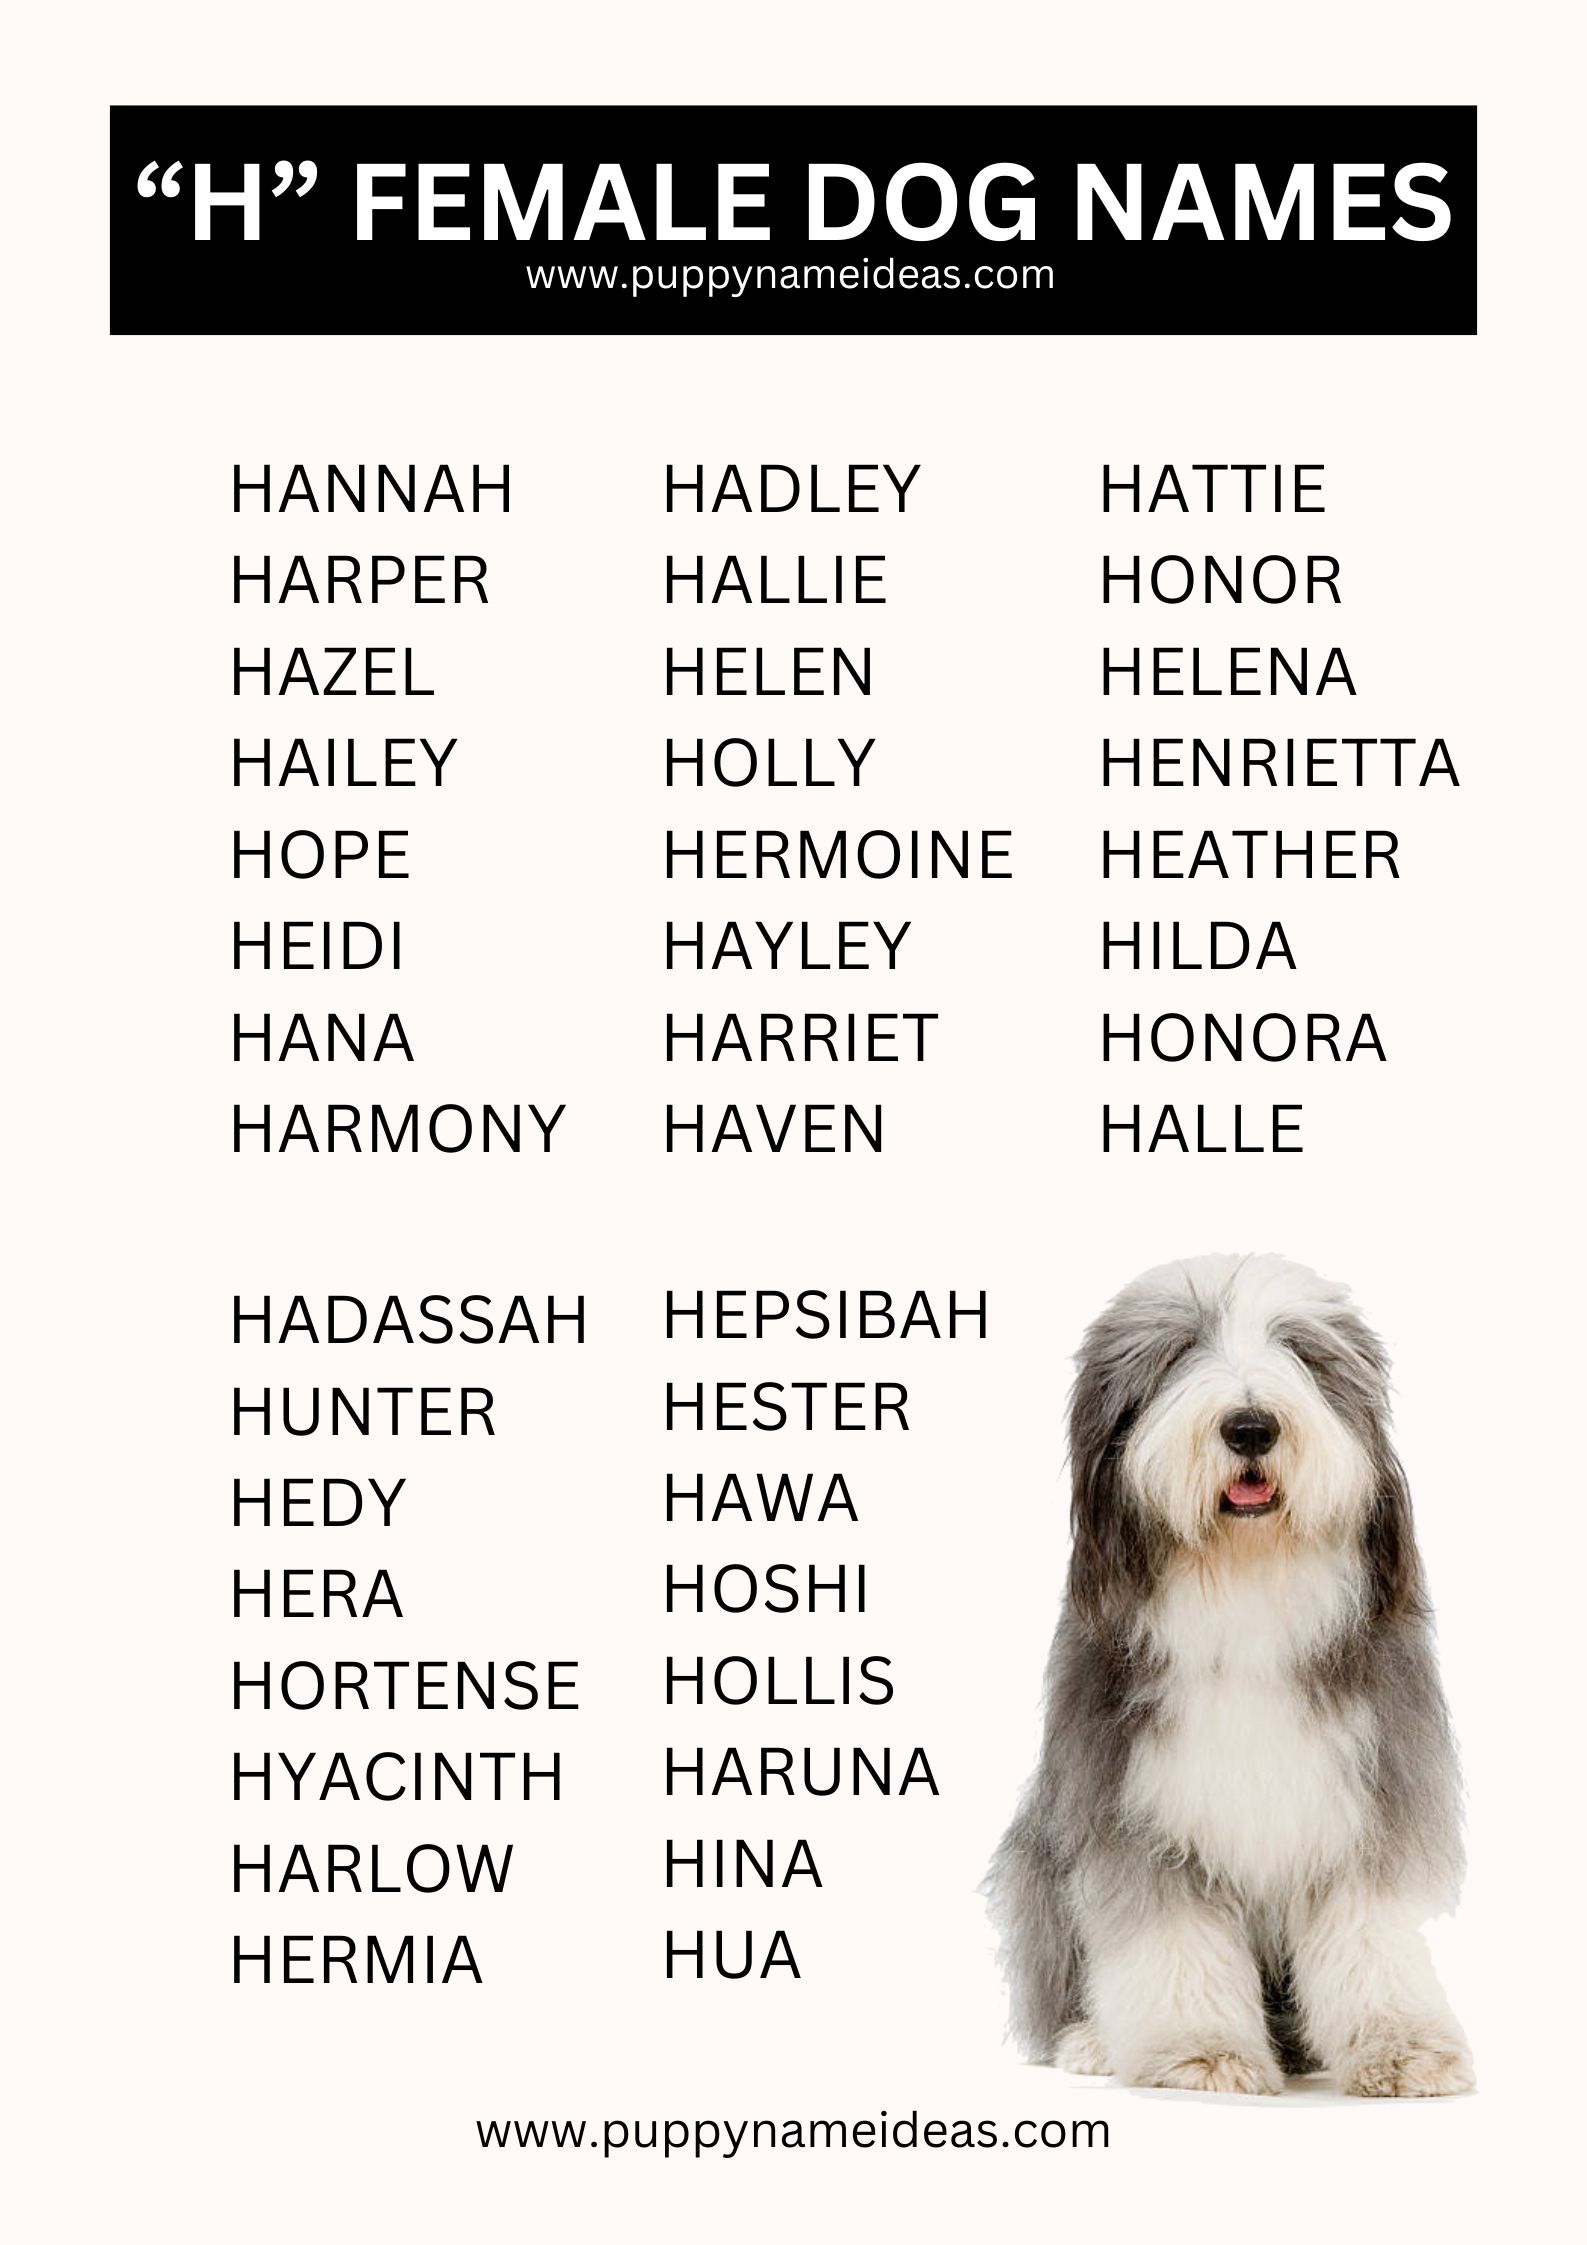 list of girl dog names that start with H